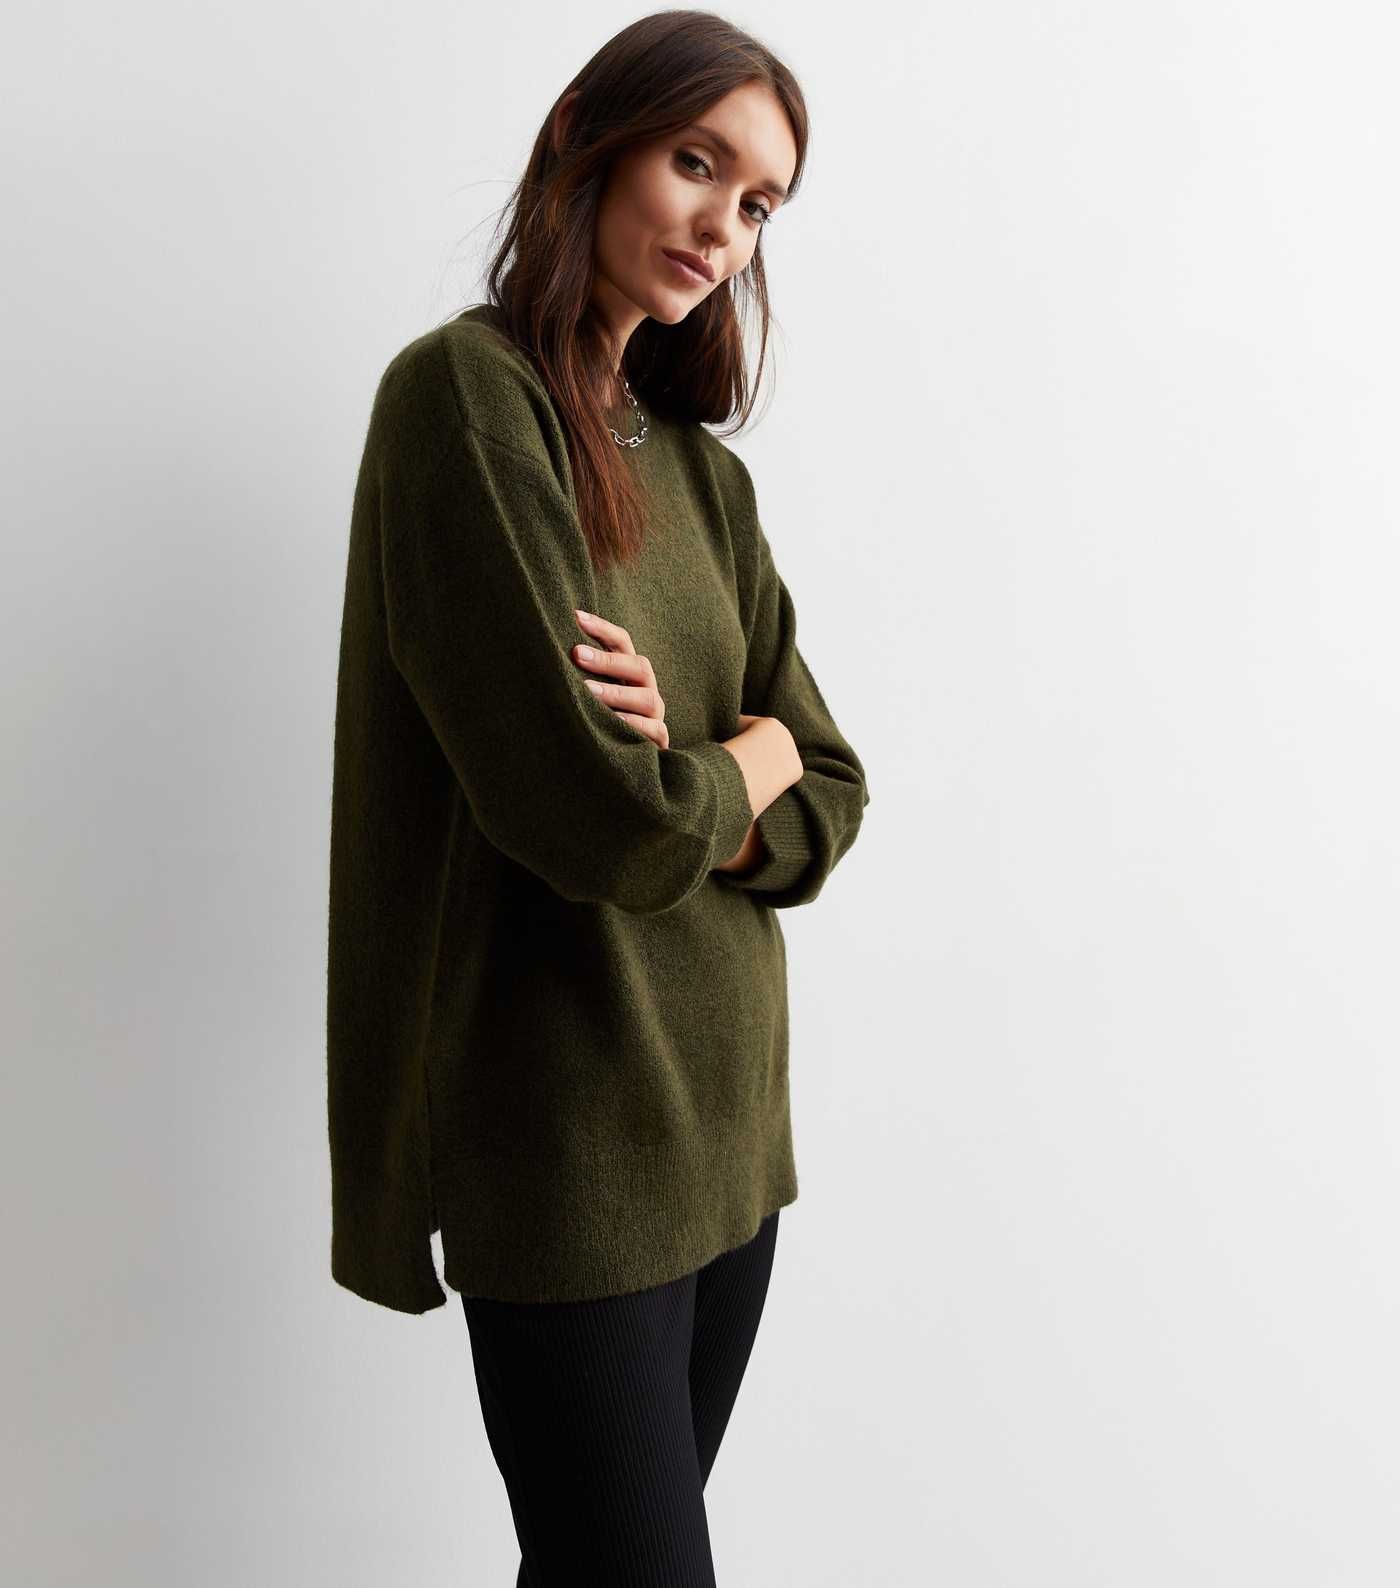 Khaki Knit Crew Neck Jumper
						
						Add to Saved Items
						Remove from Saved Items | New Look (UK)